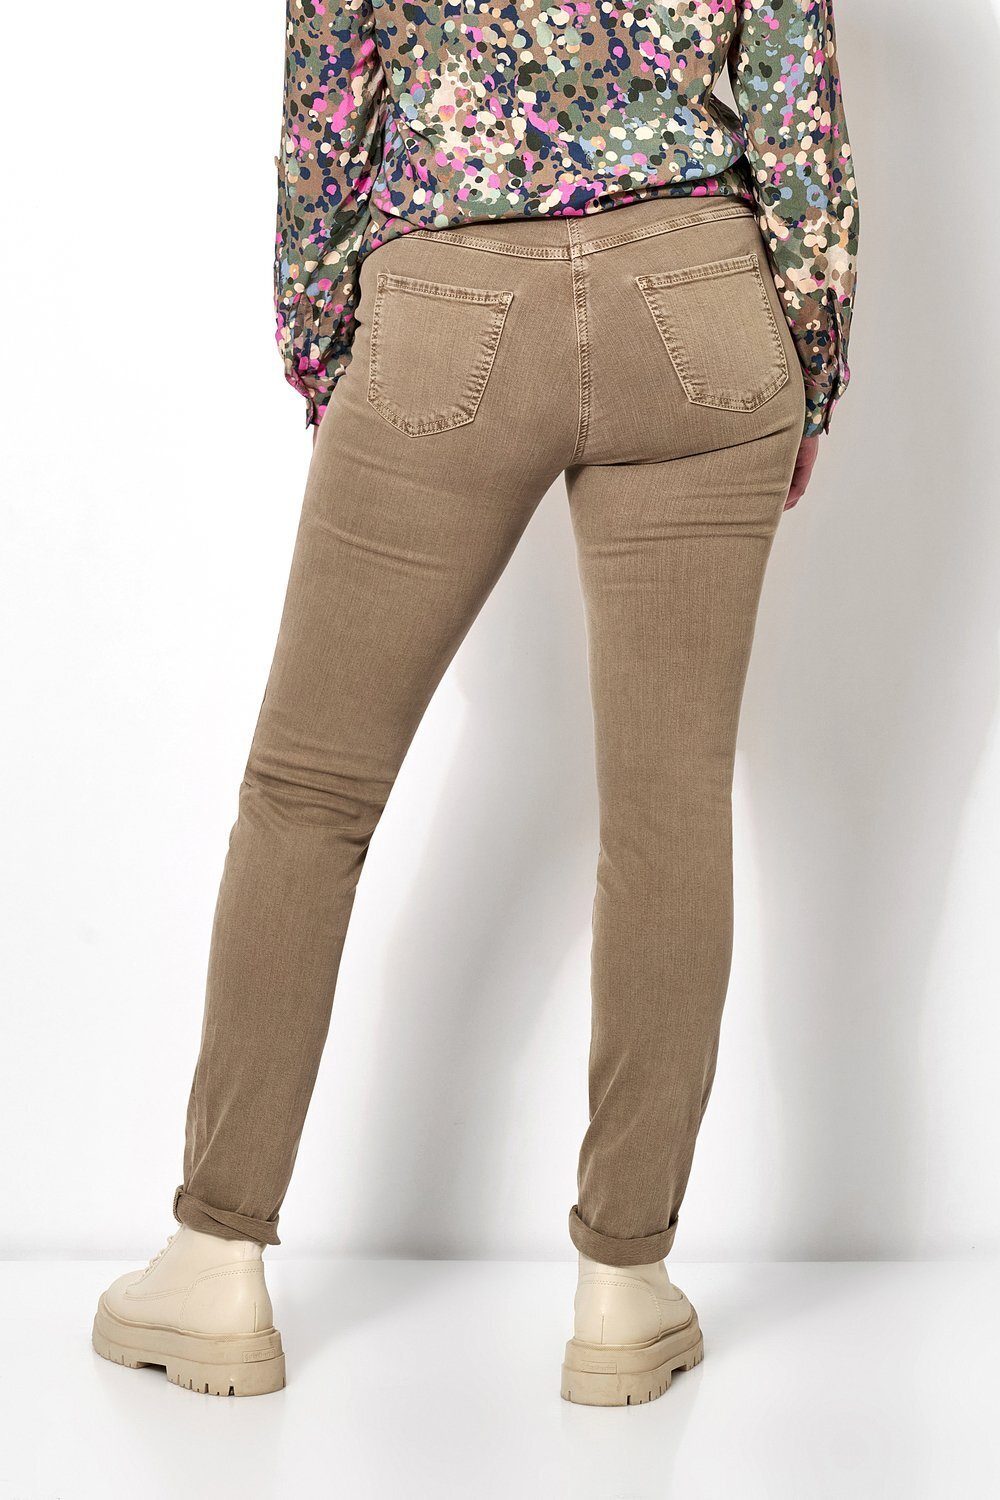 TONI Slim-fit-Jeans Shape mit by 723 taupe Hüftsattel - TONI Relaxed vorne Perfect